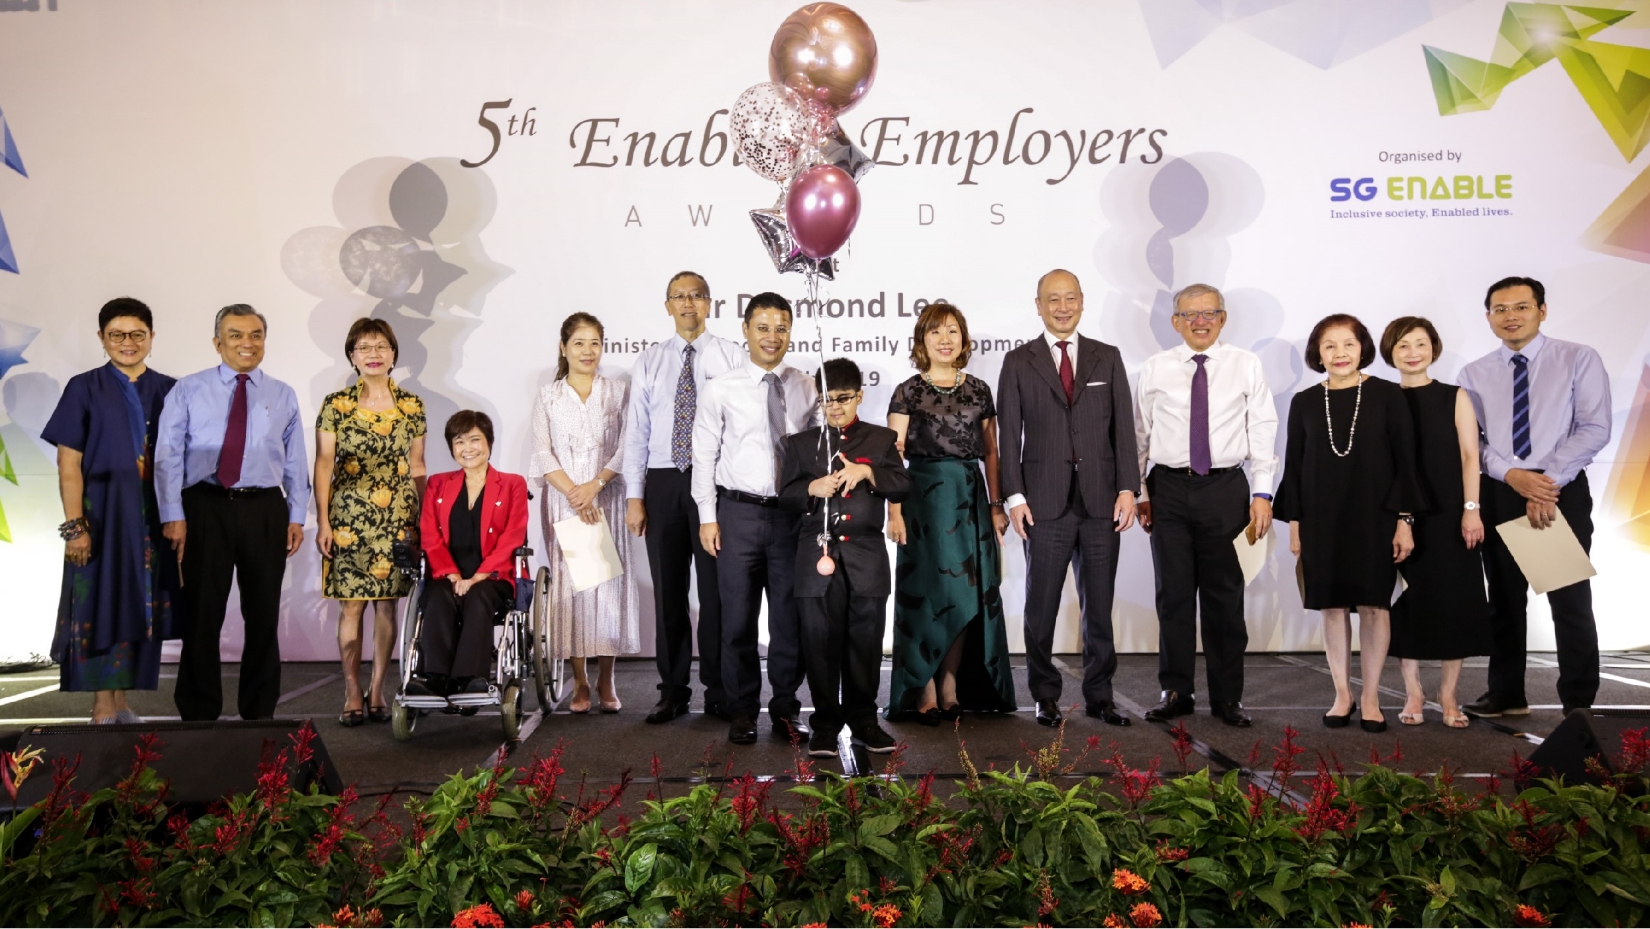 About a dozen VIPs standing on the stage at the 5th Enabling Employers Awards. In the centre, a boy holds balloons.